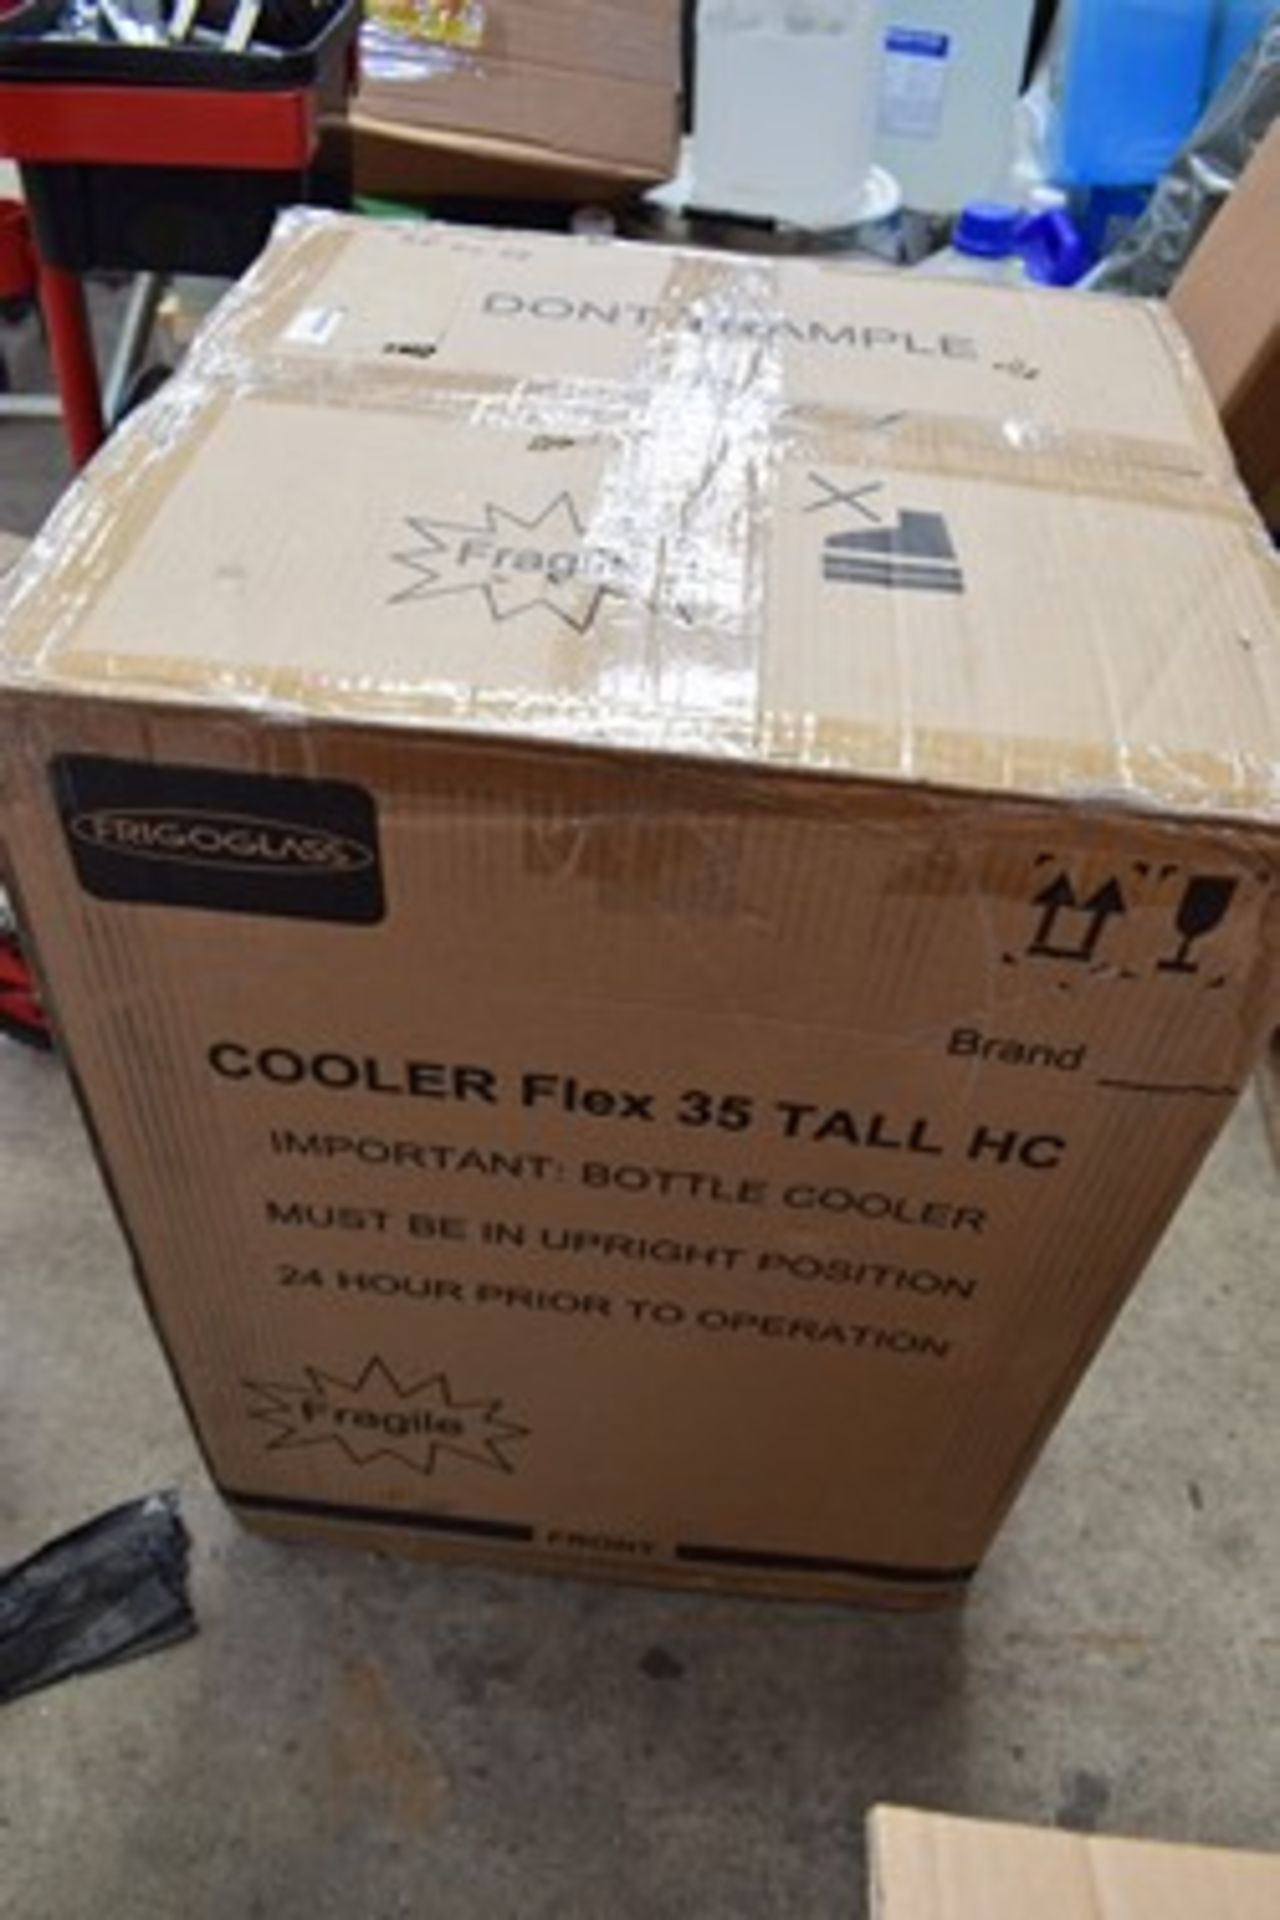 1 x Frigoglass 35 tall HC flex cooler, top cap off at door and some scratches - new in box (GS11)